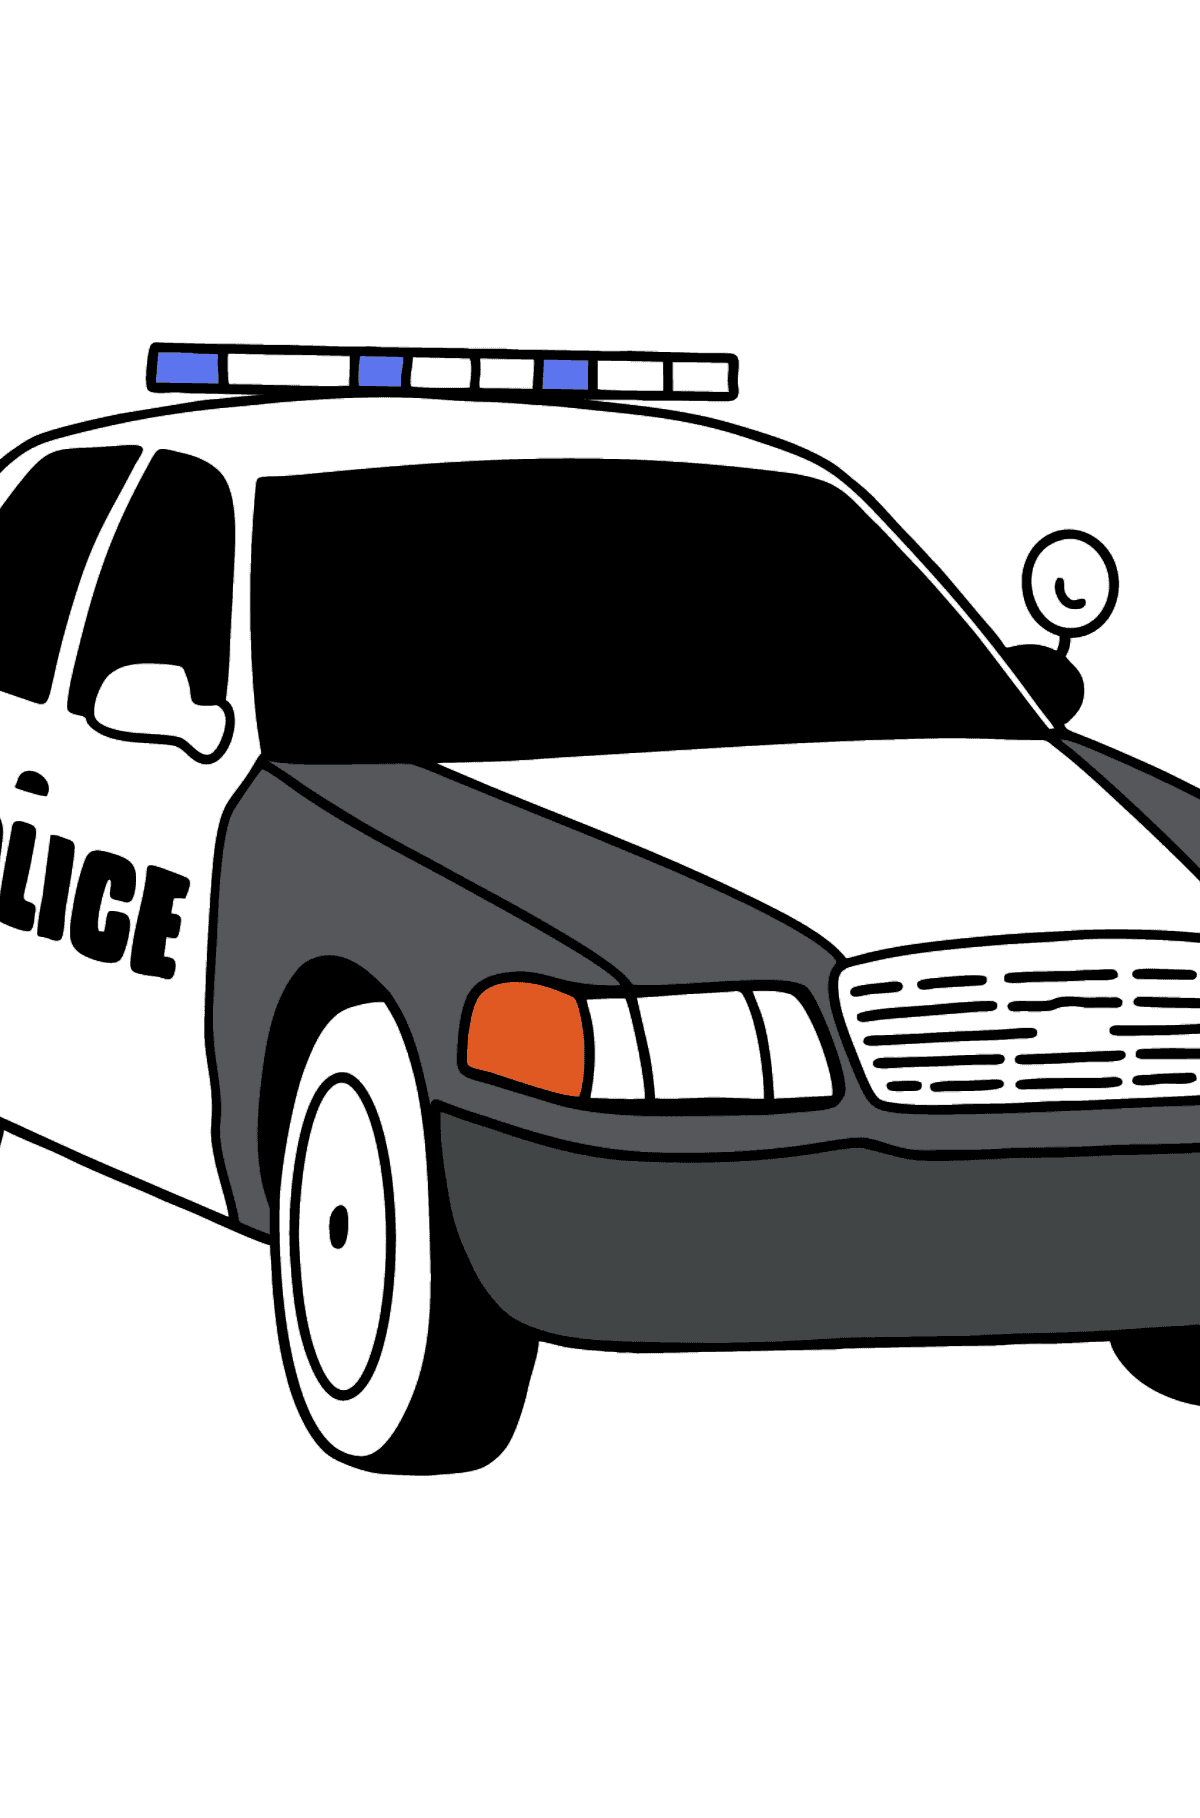 US Police Car coloring page - Coloring Pages for Kids